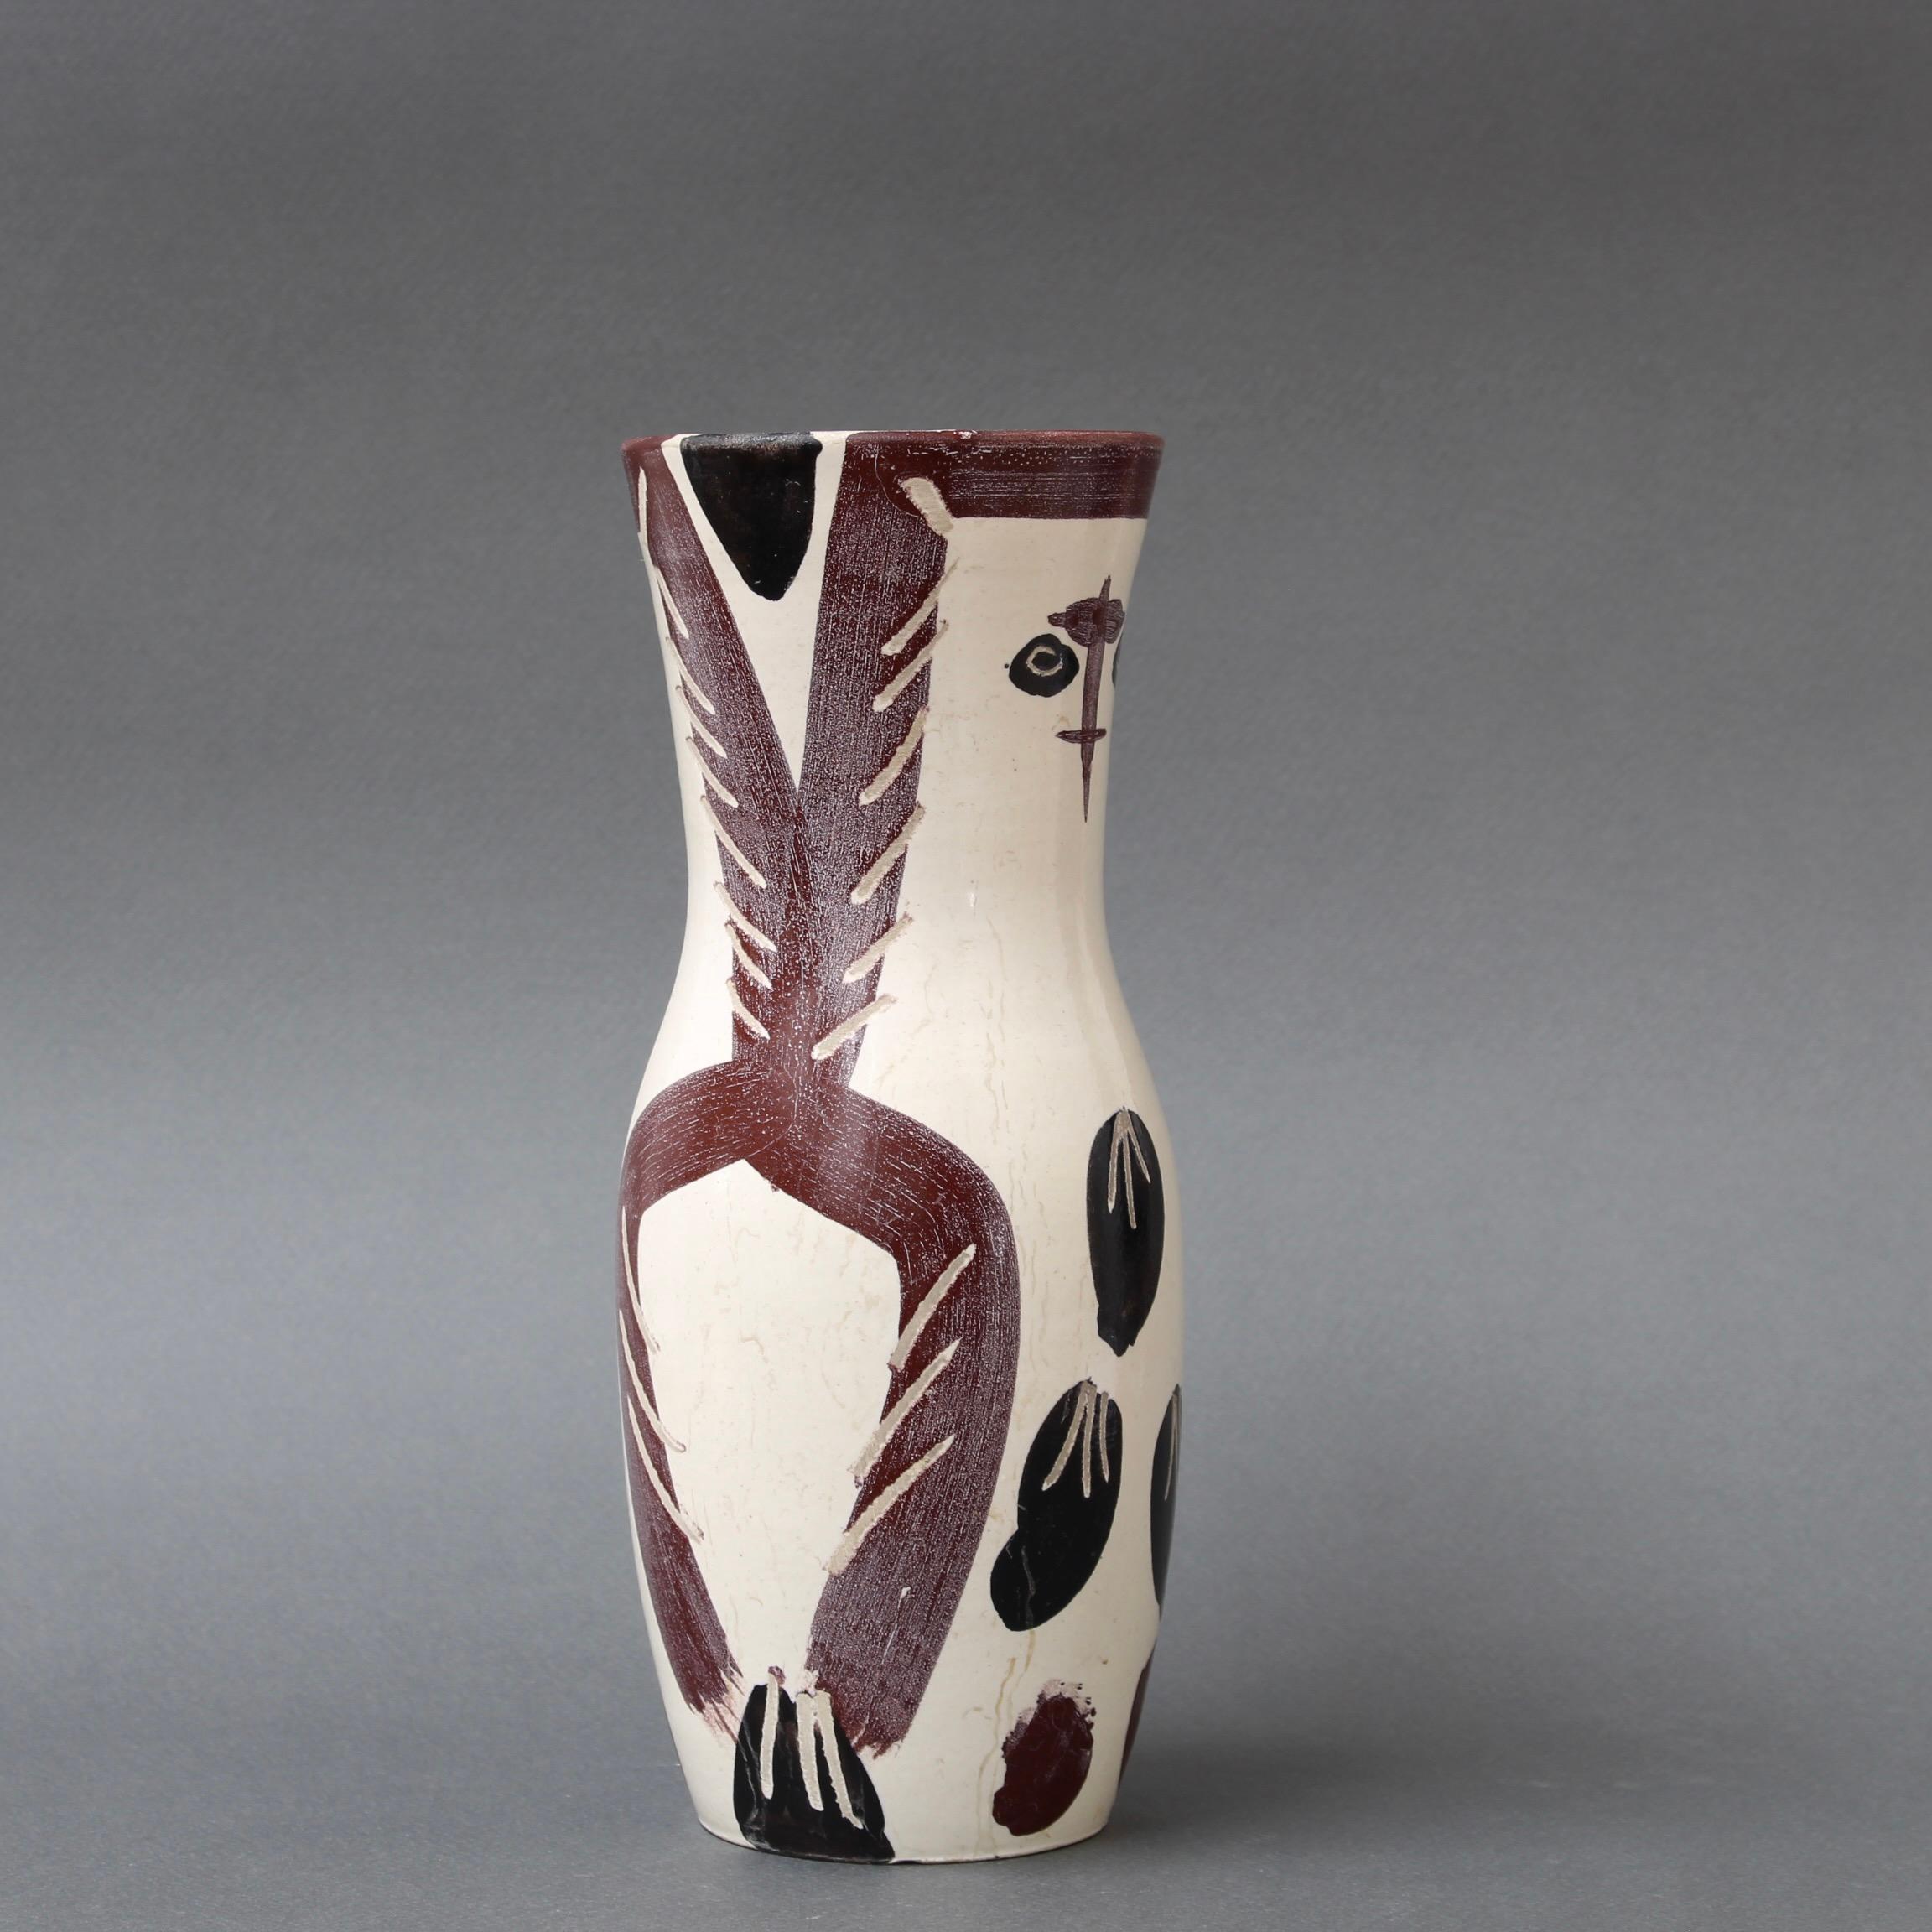 Mid-Century earthenware vase with painted owl decoration, by Pablo Picasso, Vallauris, France (1952). This is a vintage, limited edition earthenware creation, in a run of 500 (Edition Picasso) at the Madoura pottery under the supervision of Pablo